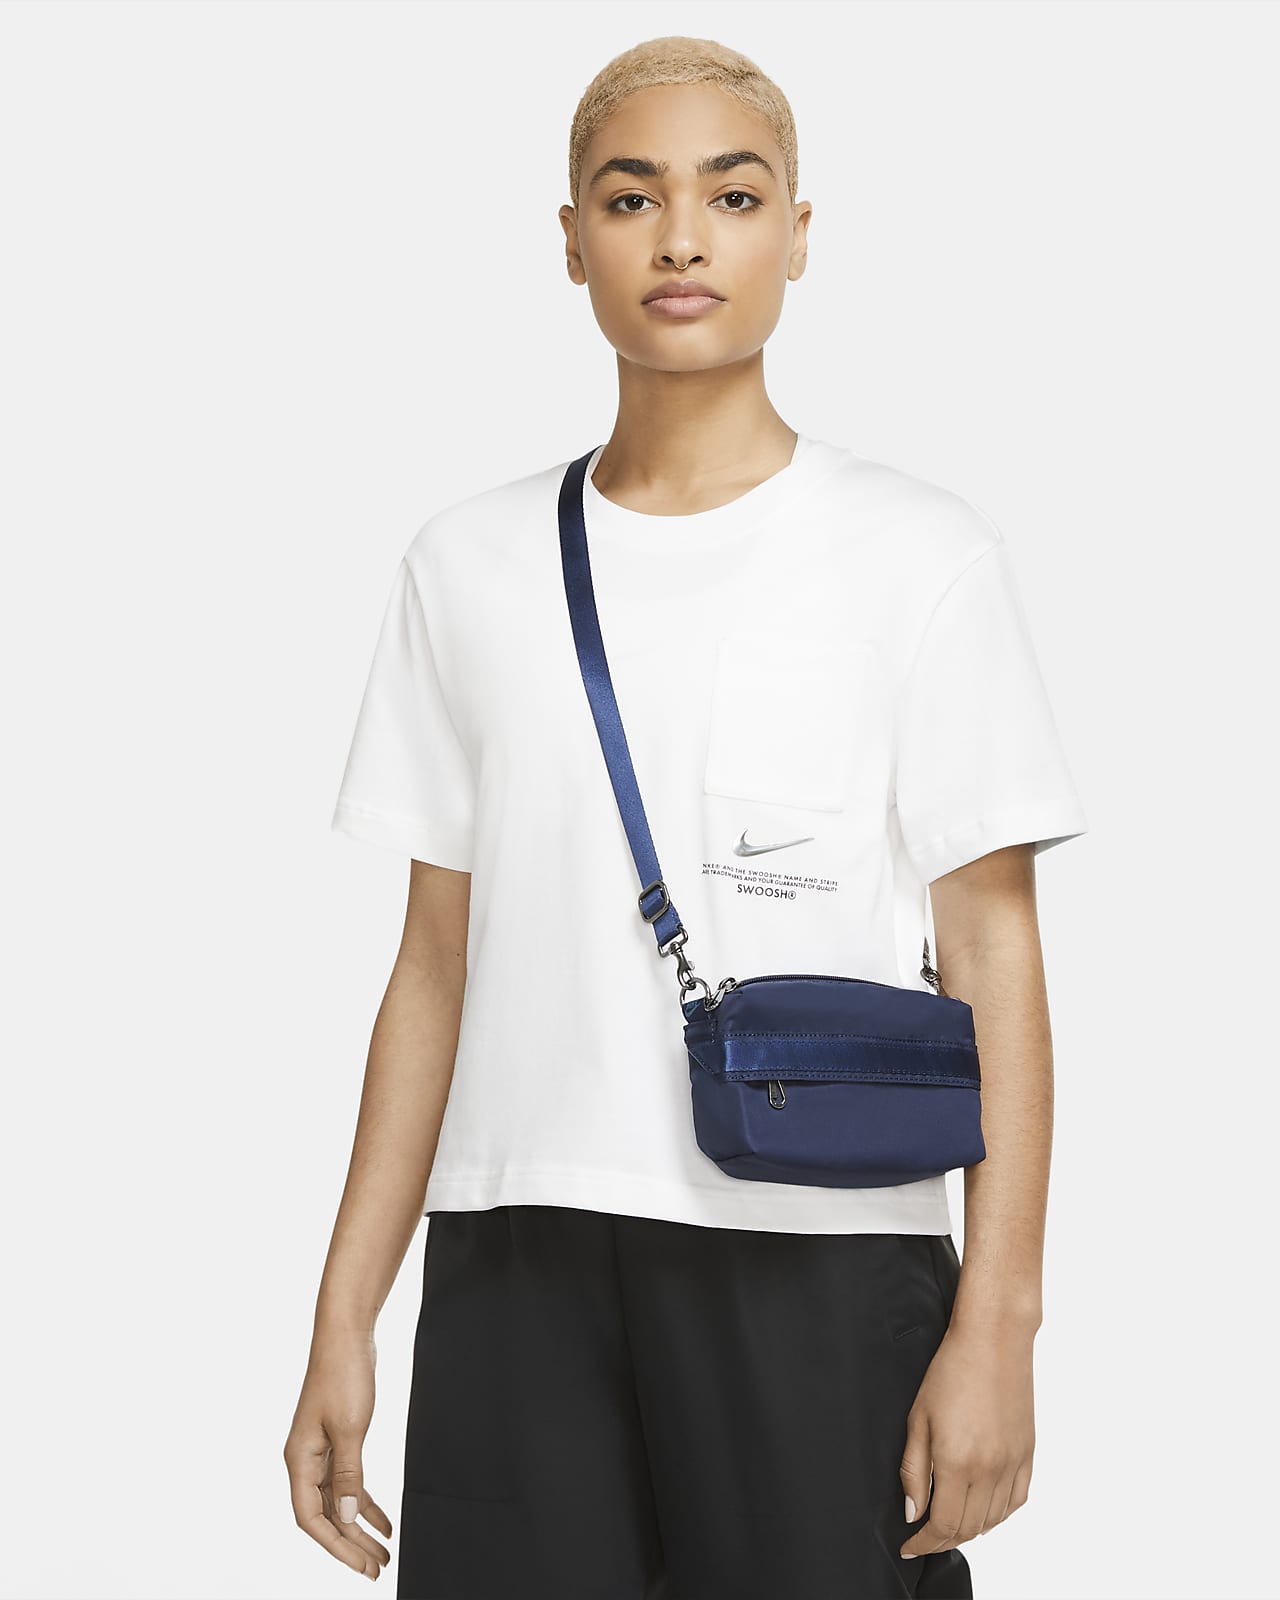 Nike Luxe Bag on Sale, SAVE 52% 